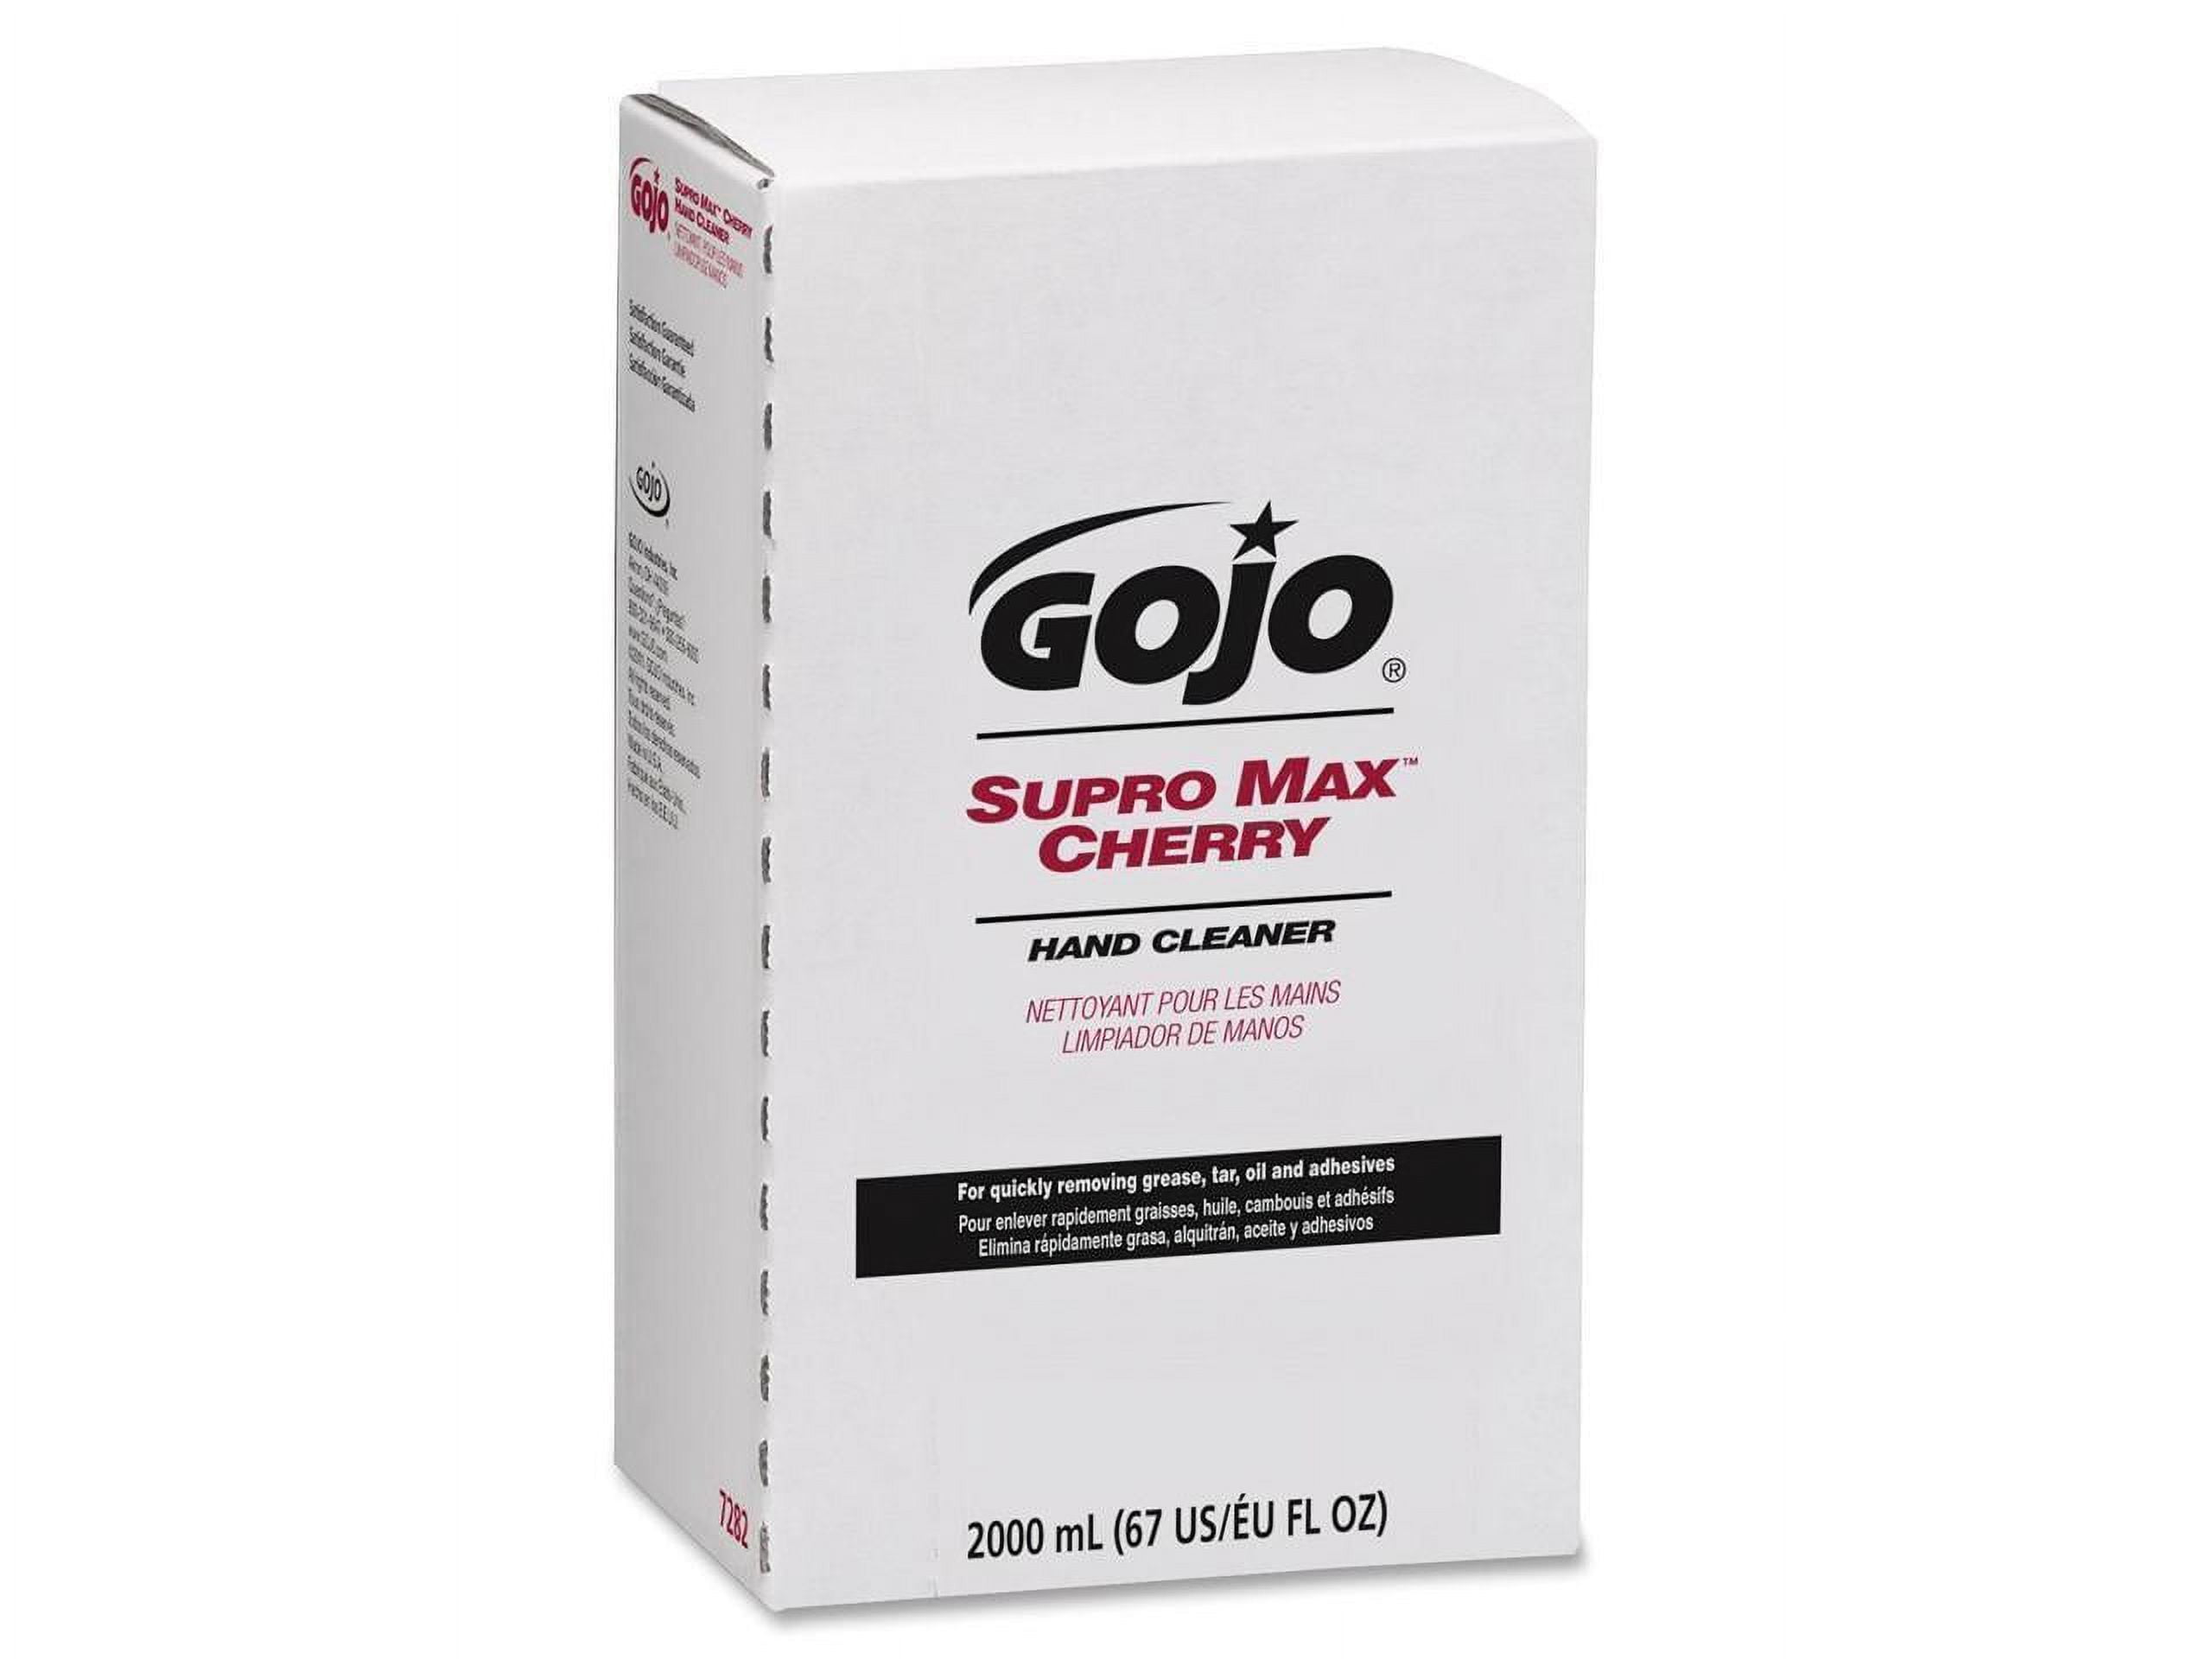 GOJO SUPRO MAX Hand Cleaner, 1/2 Gallon Heavy Duty Hand Cleaner Pump  Bottles (Pack of 1), 1 - Kroger